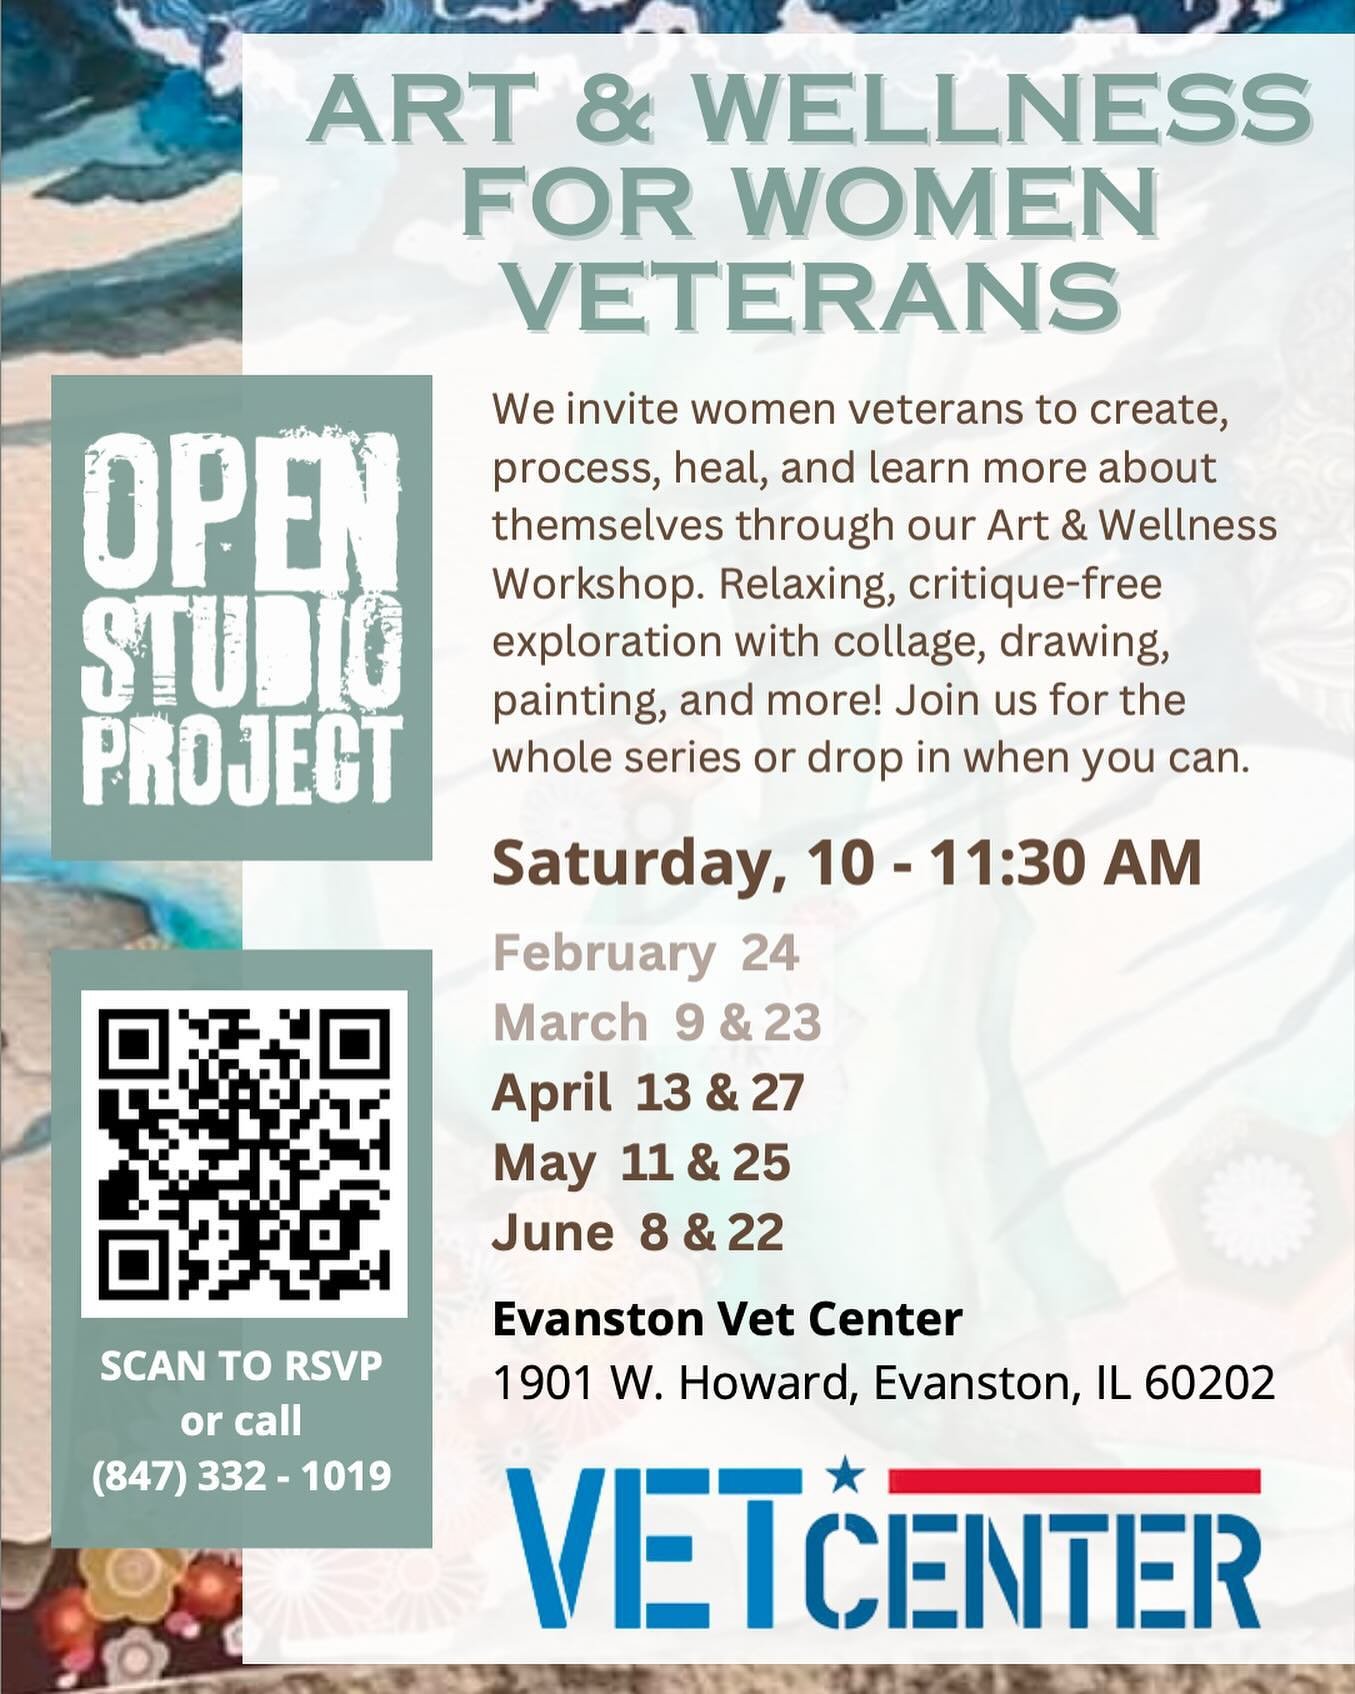 The Evanston Vet Center hosts an Open Studio Project art workshop for women veterans on the 2nd &amp; 4th Saturday of every month. Join us this Saturday 4/27! We&rsquo;ll be enjoying some stress-free creative time together&mdash;making, chatting, and